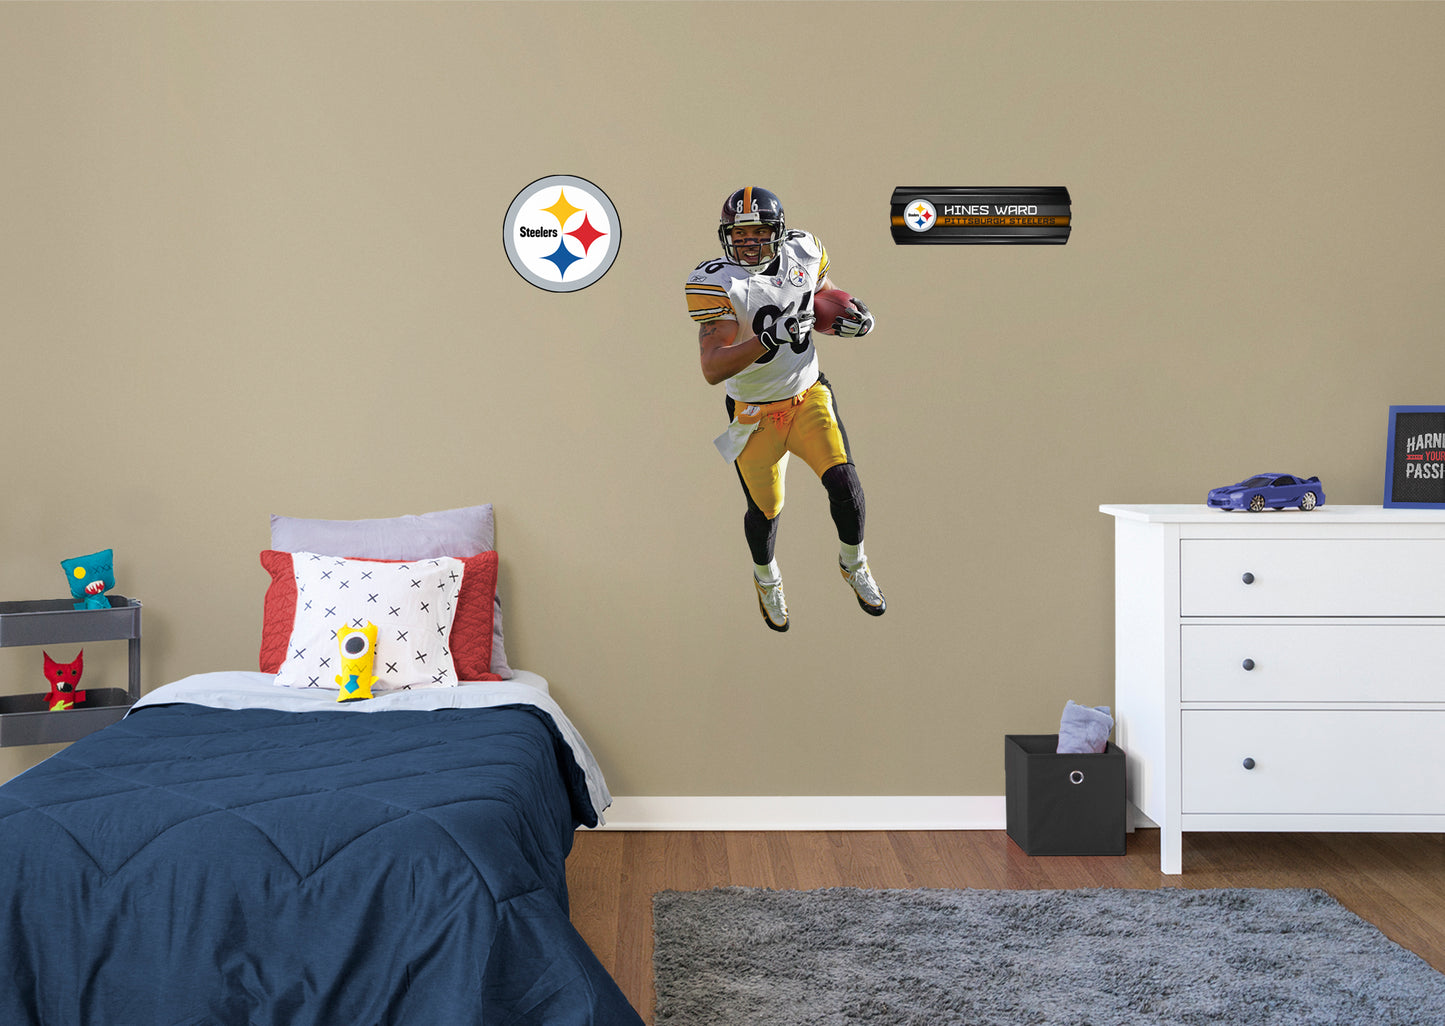 Pittsburgh Steelers: Hines Ward  Legend        - Officially Licensed NFL Removable Wall   Adhesive Decal